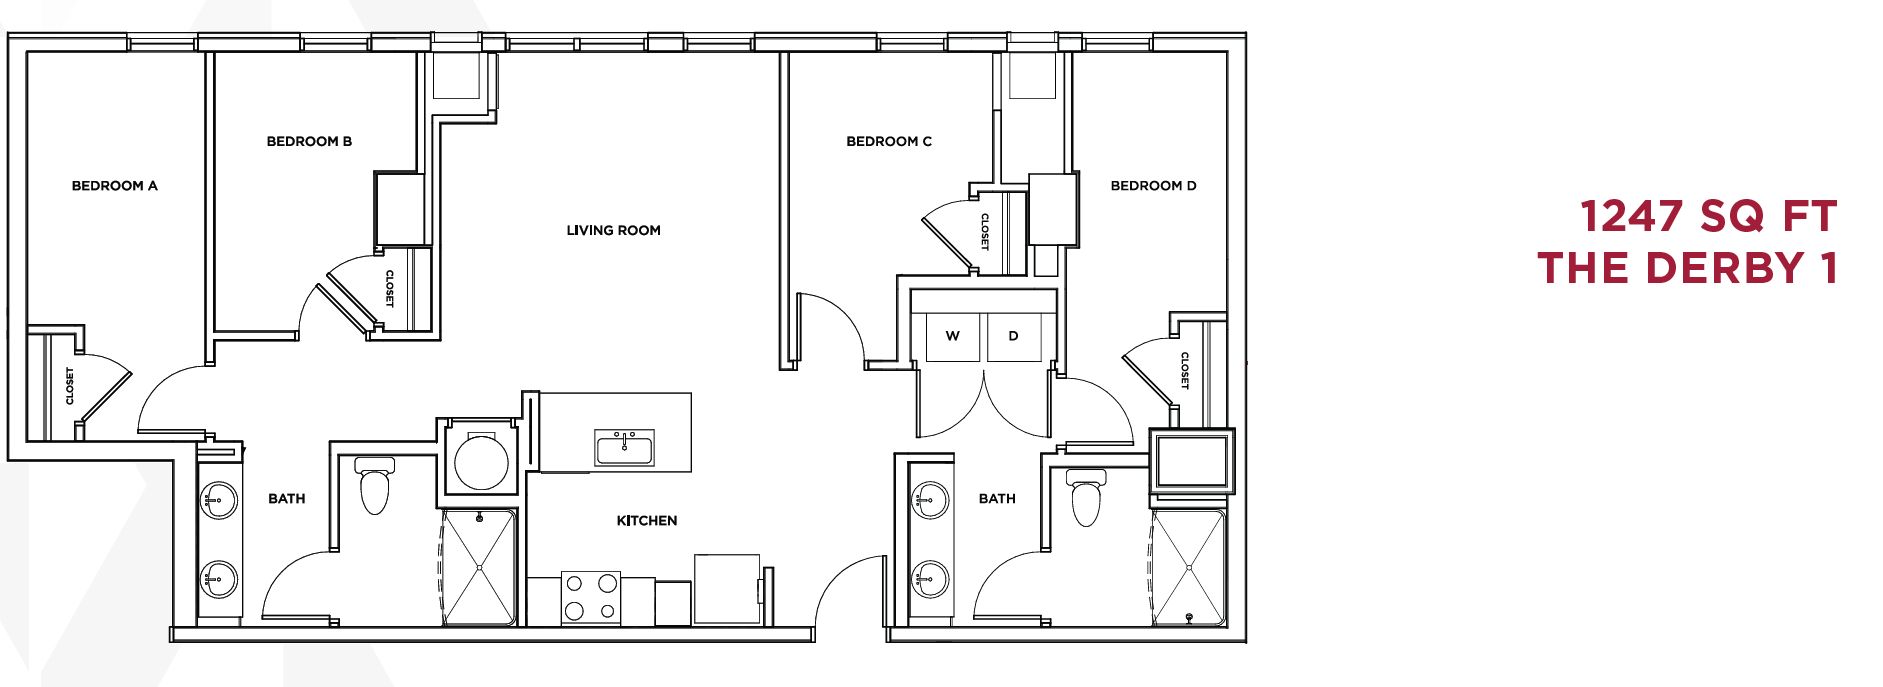 The Standard at Philadelphia at 119 South 31st Street. Floor plan of a four-bedroom apartment of type Derby. Credit: Landmark Properties